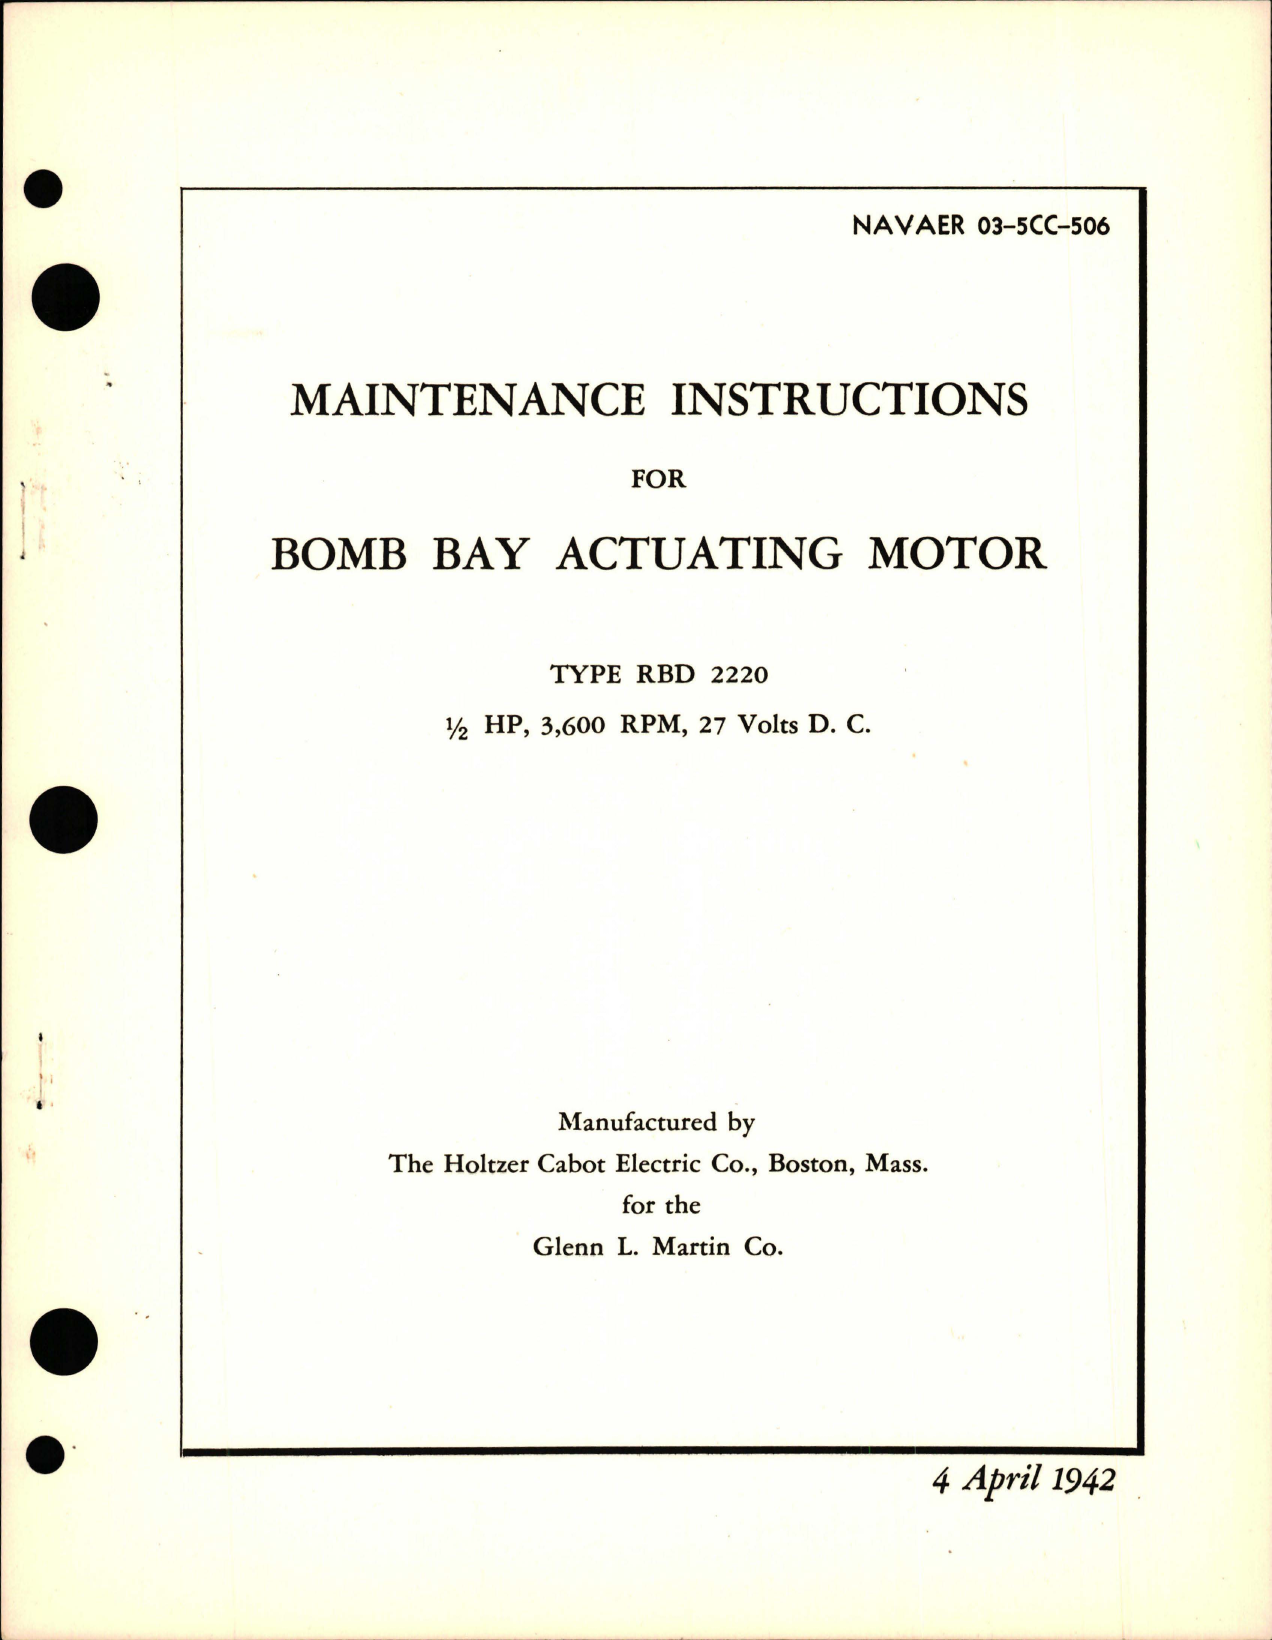 Sample page 1 from AirCorps Library document: Maintenance Instructions for Bomb Bay Actuating Motor - Type RBD 2220, 1/2 HP, 3,600 RPM, 27 Volts D.C.